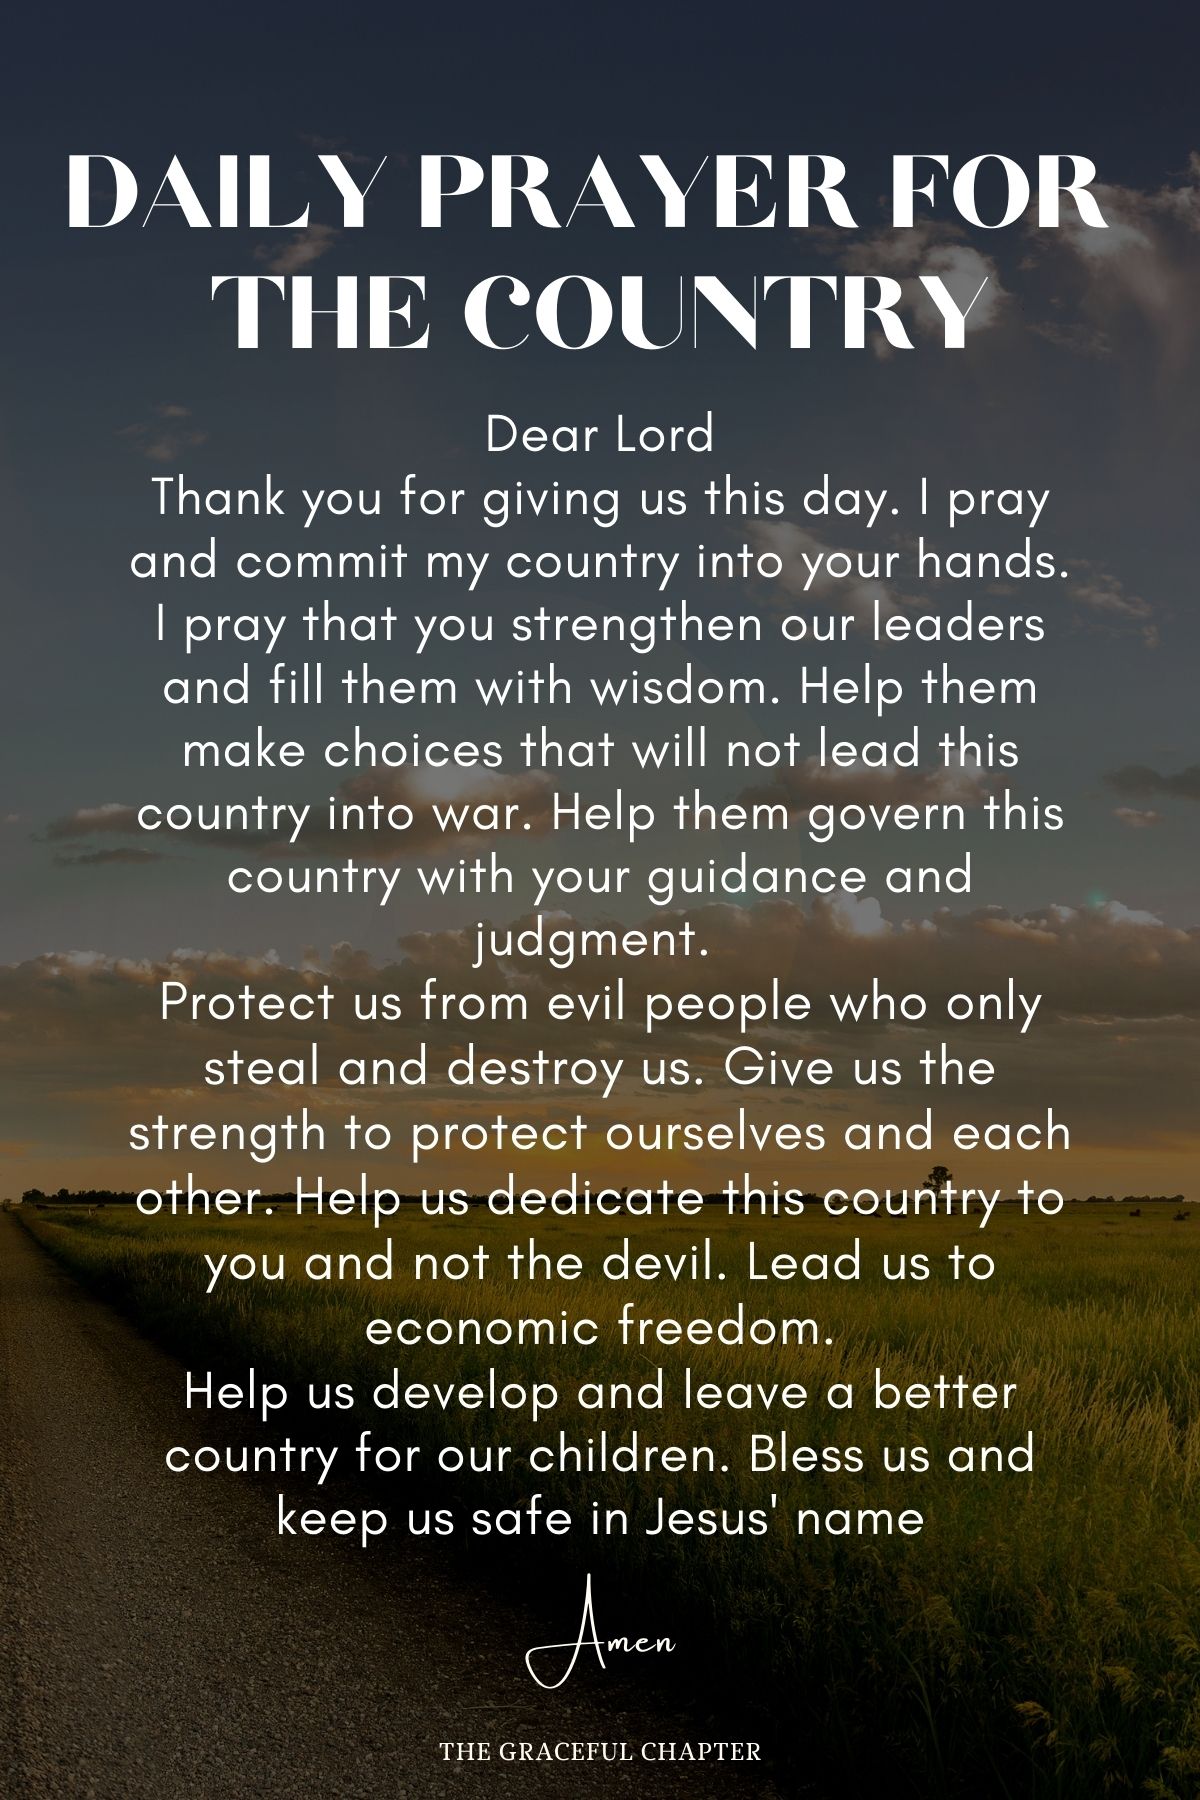 Daily Prayer for the Country